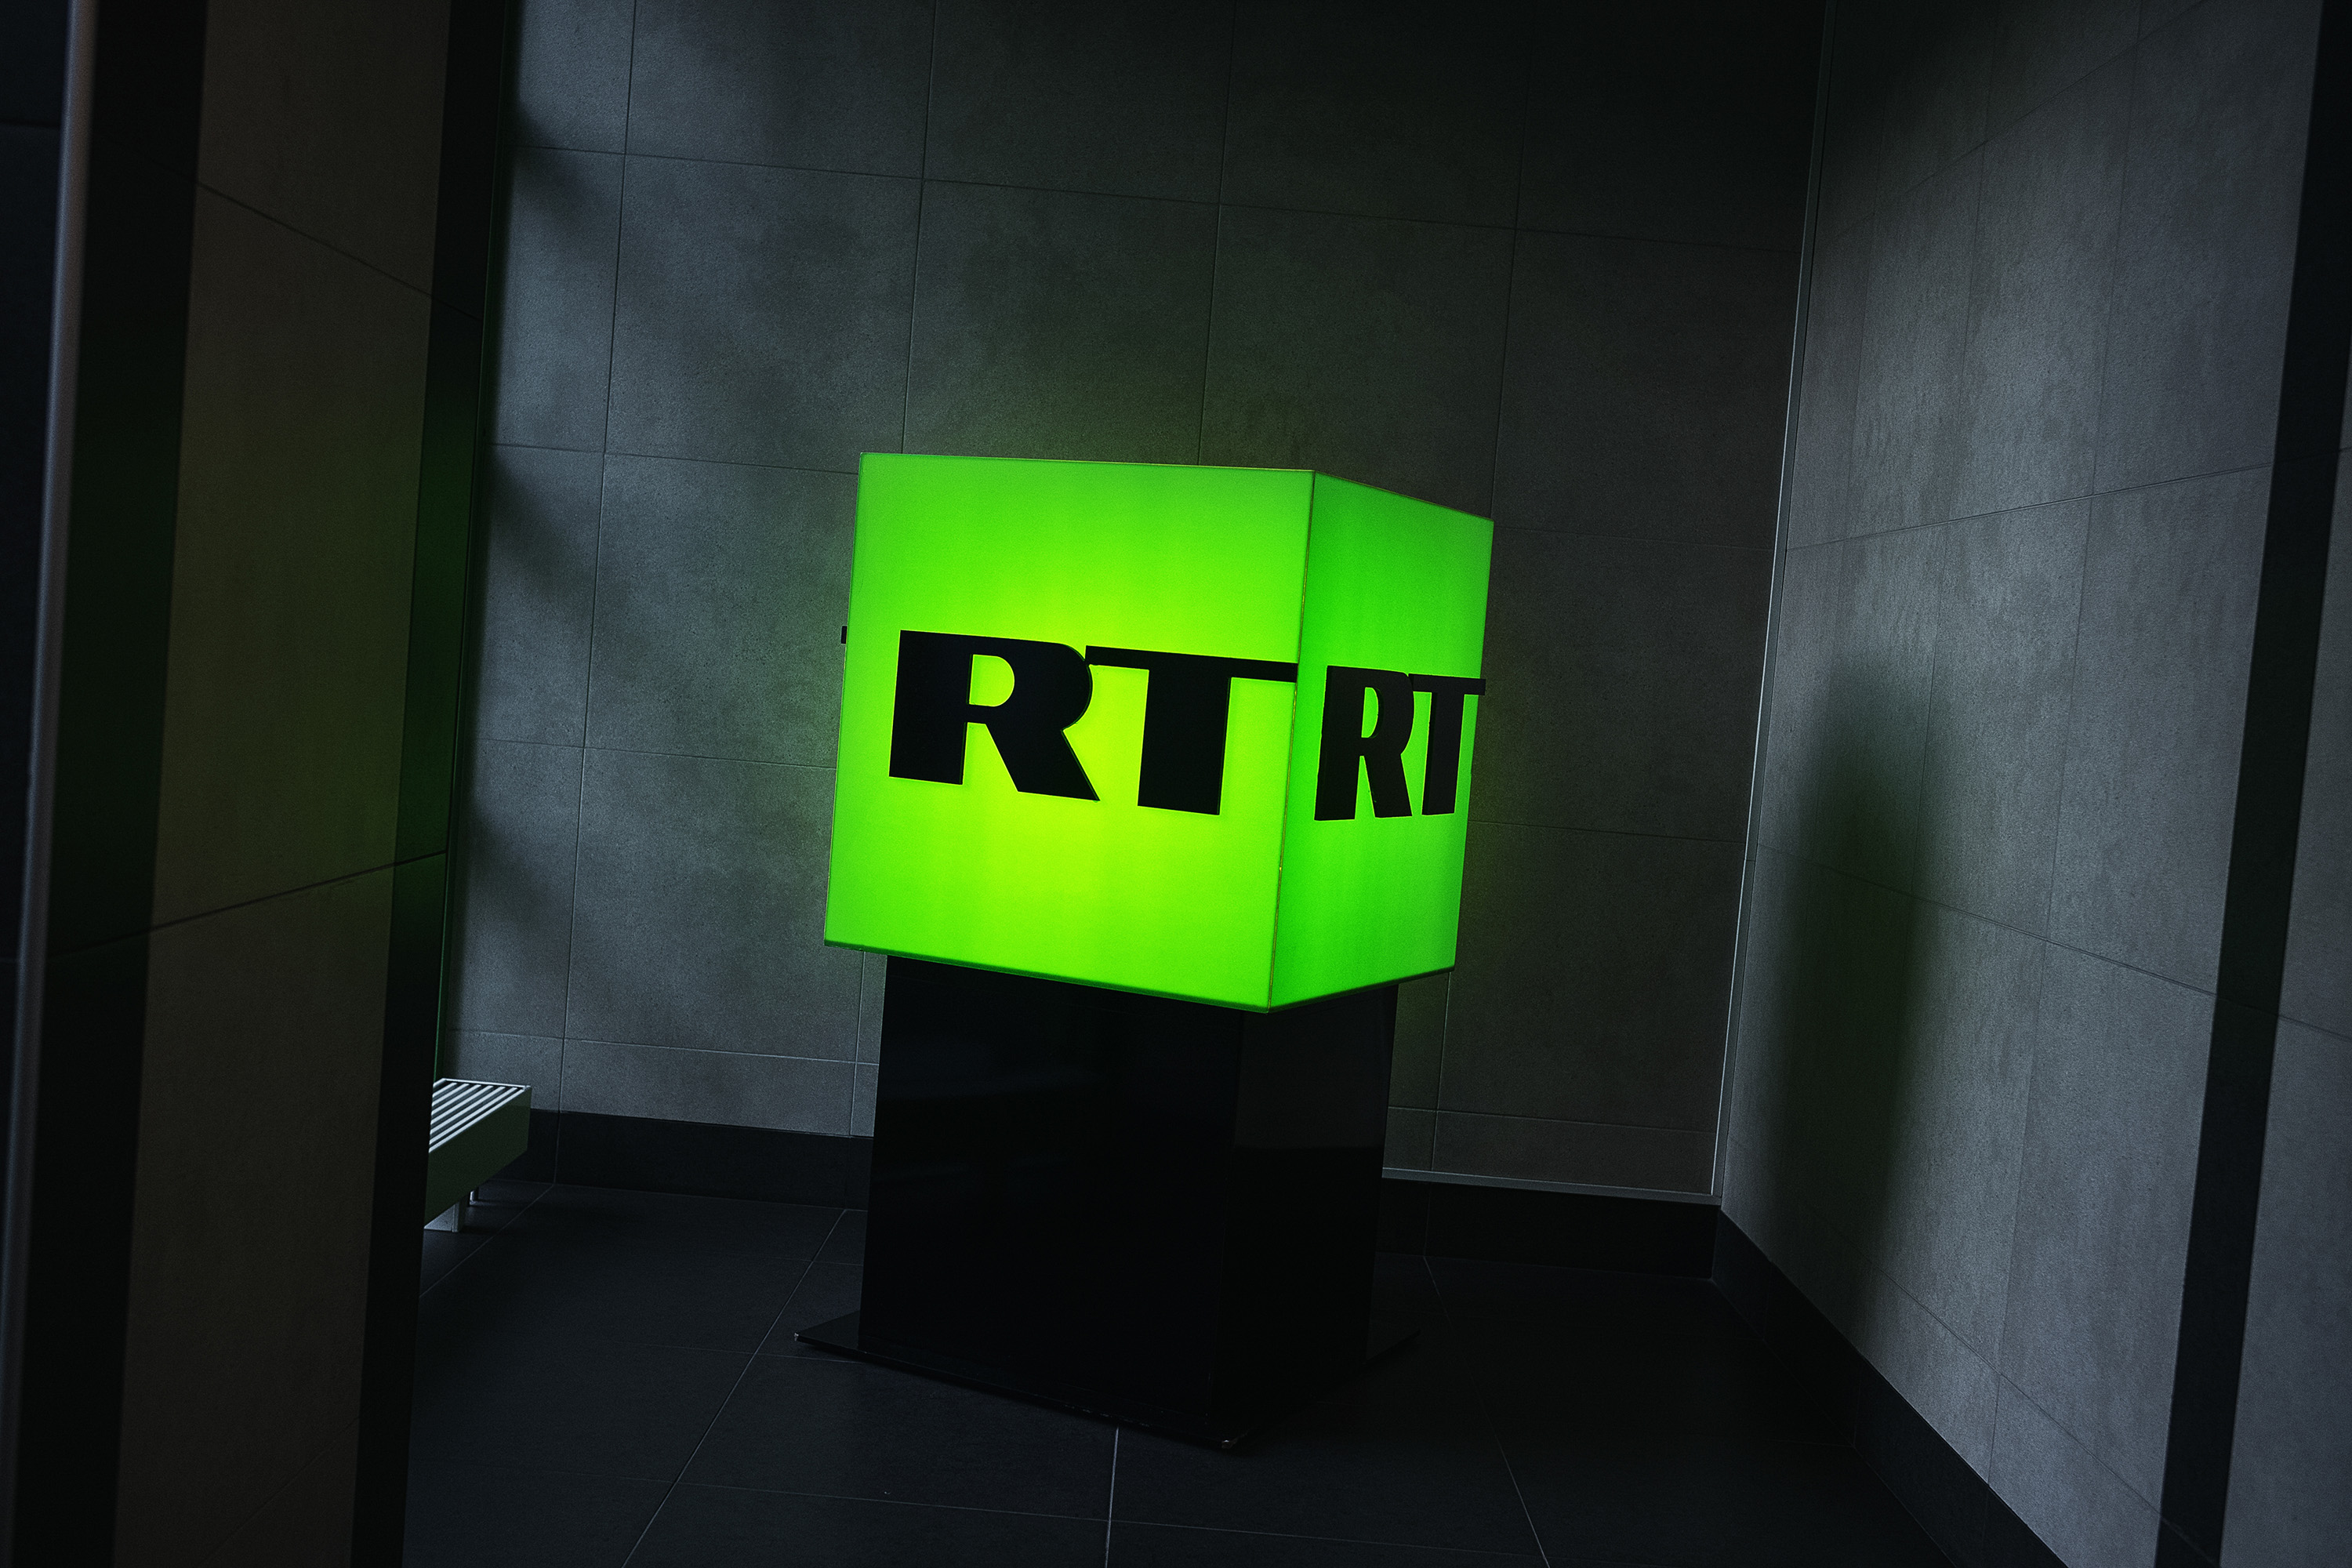 The EU&nbsp;banned&nbsp;RT in March, accusing it of spreading “propaganda.”